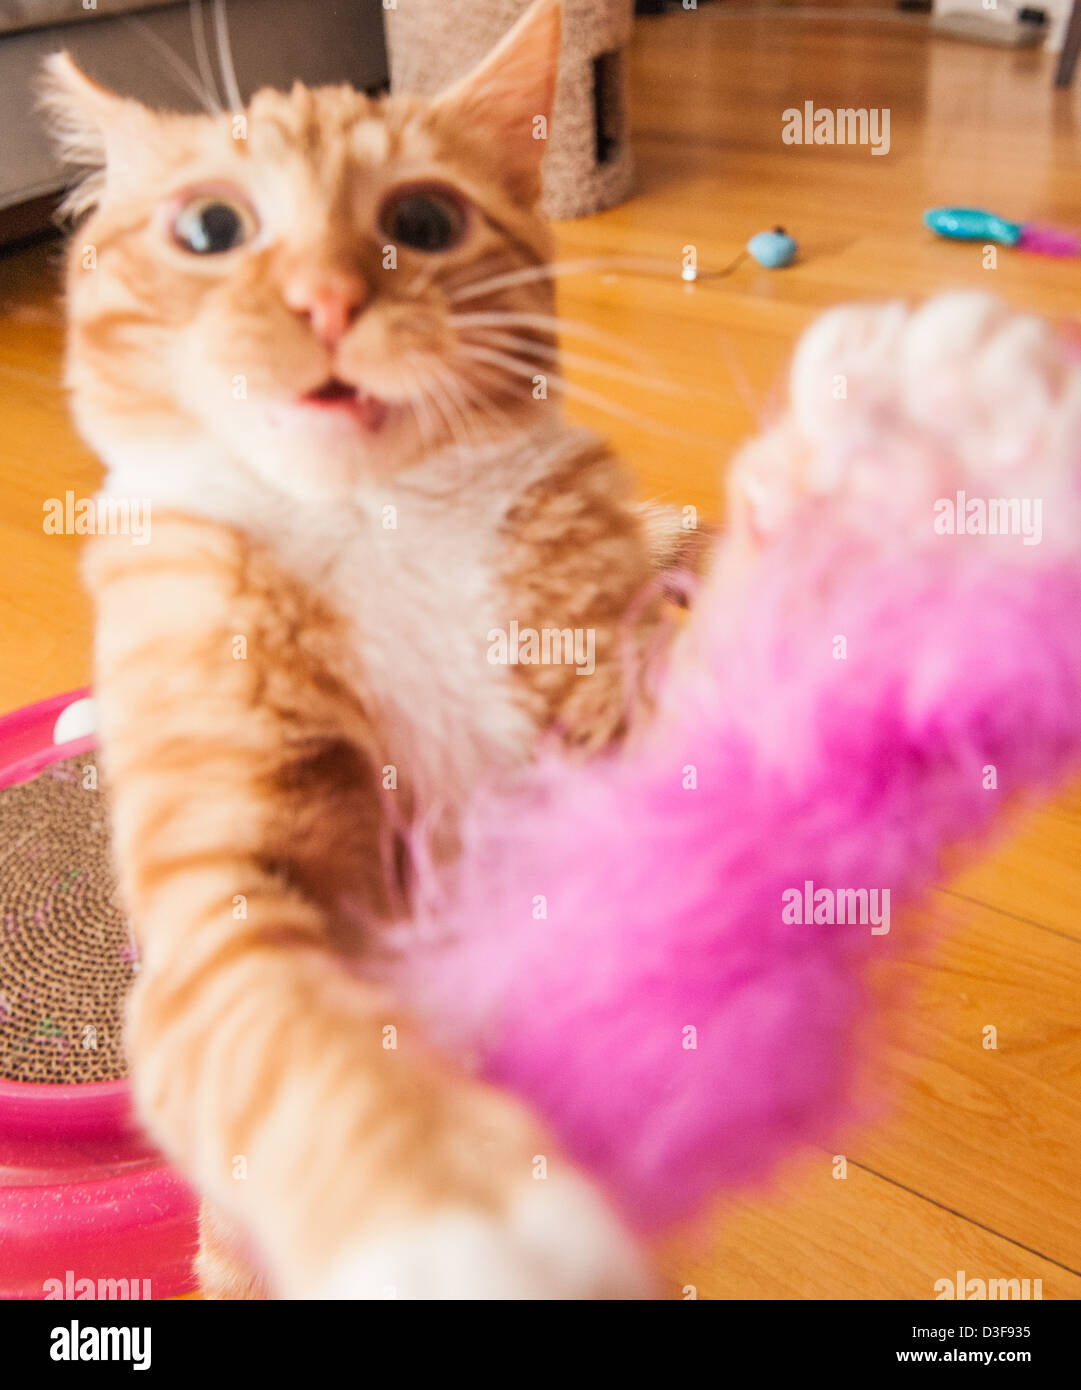 Four month old orange tabby cat playing with toy Stock Photo